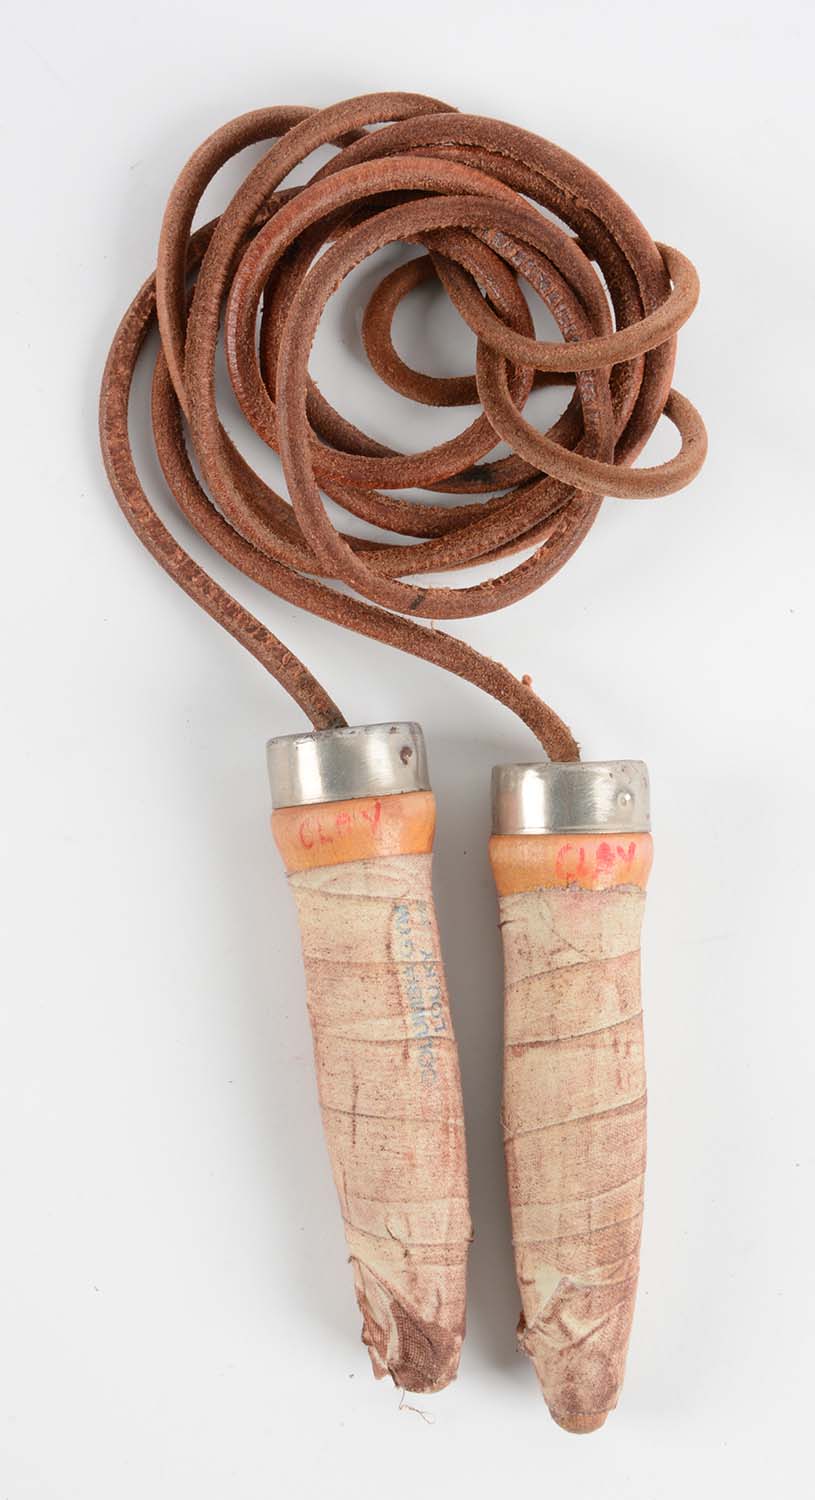 Cassius Clay Columbia Gym Used Jump Rope, estimated at $2,000-4,000.